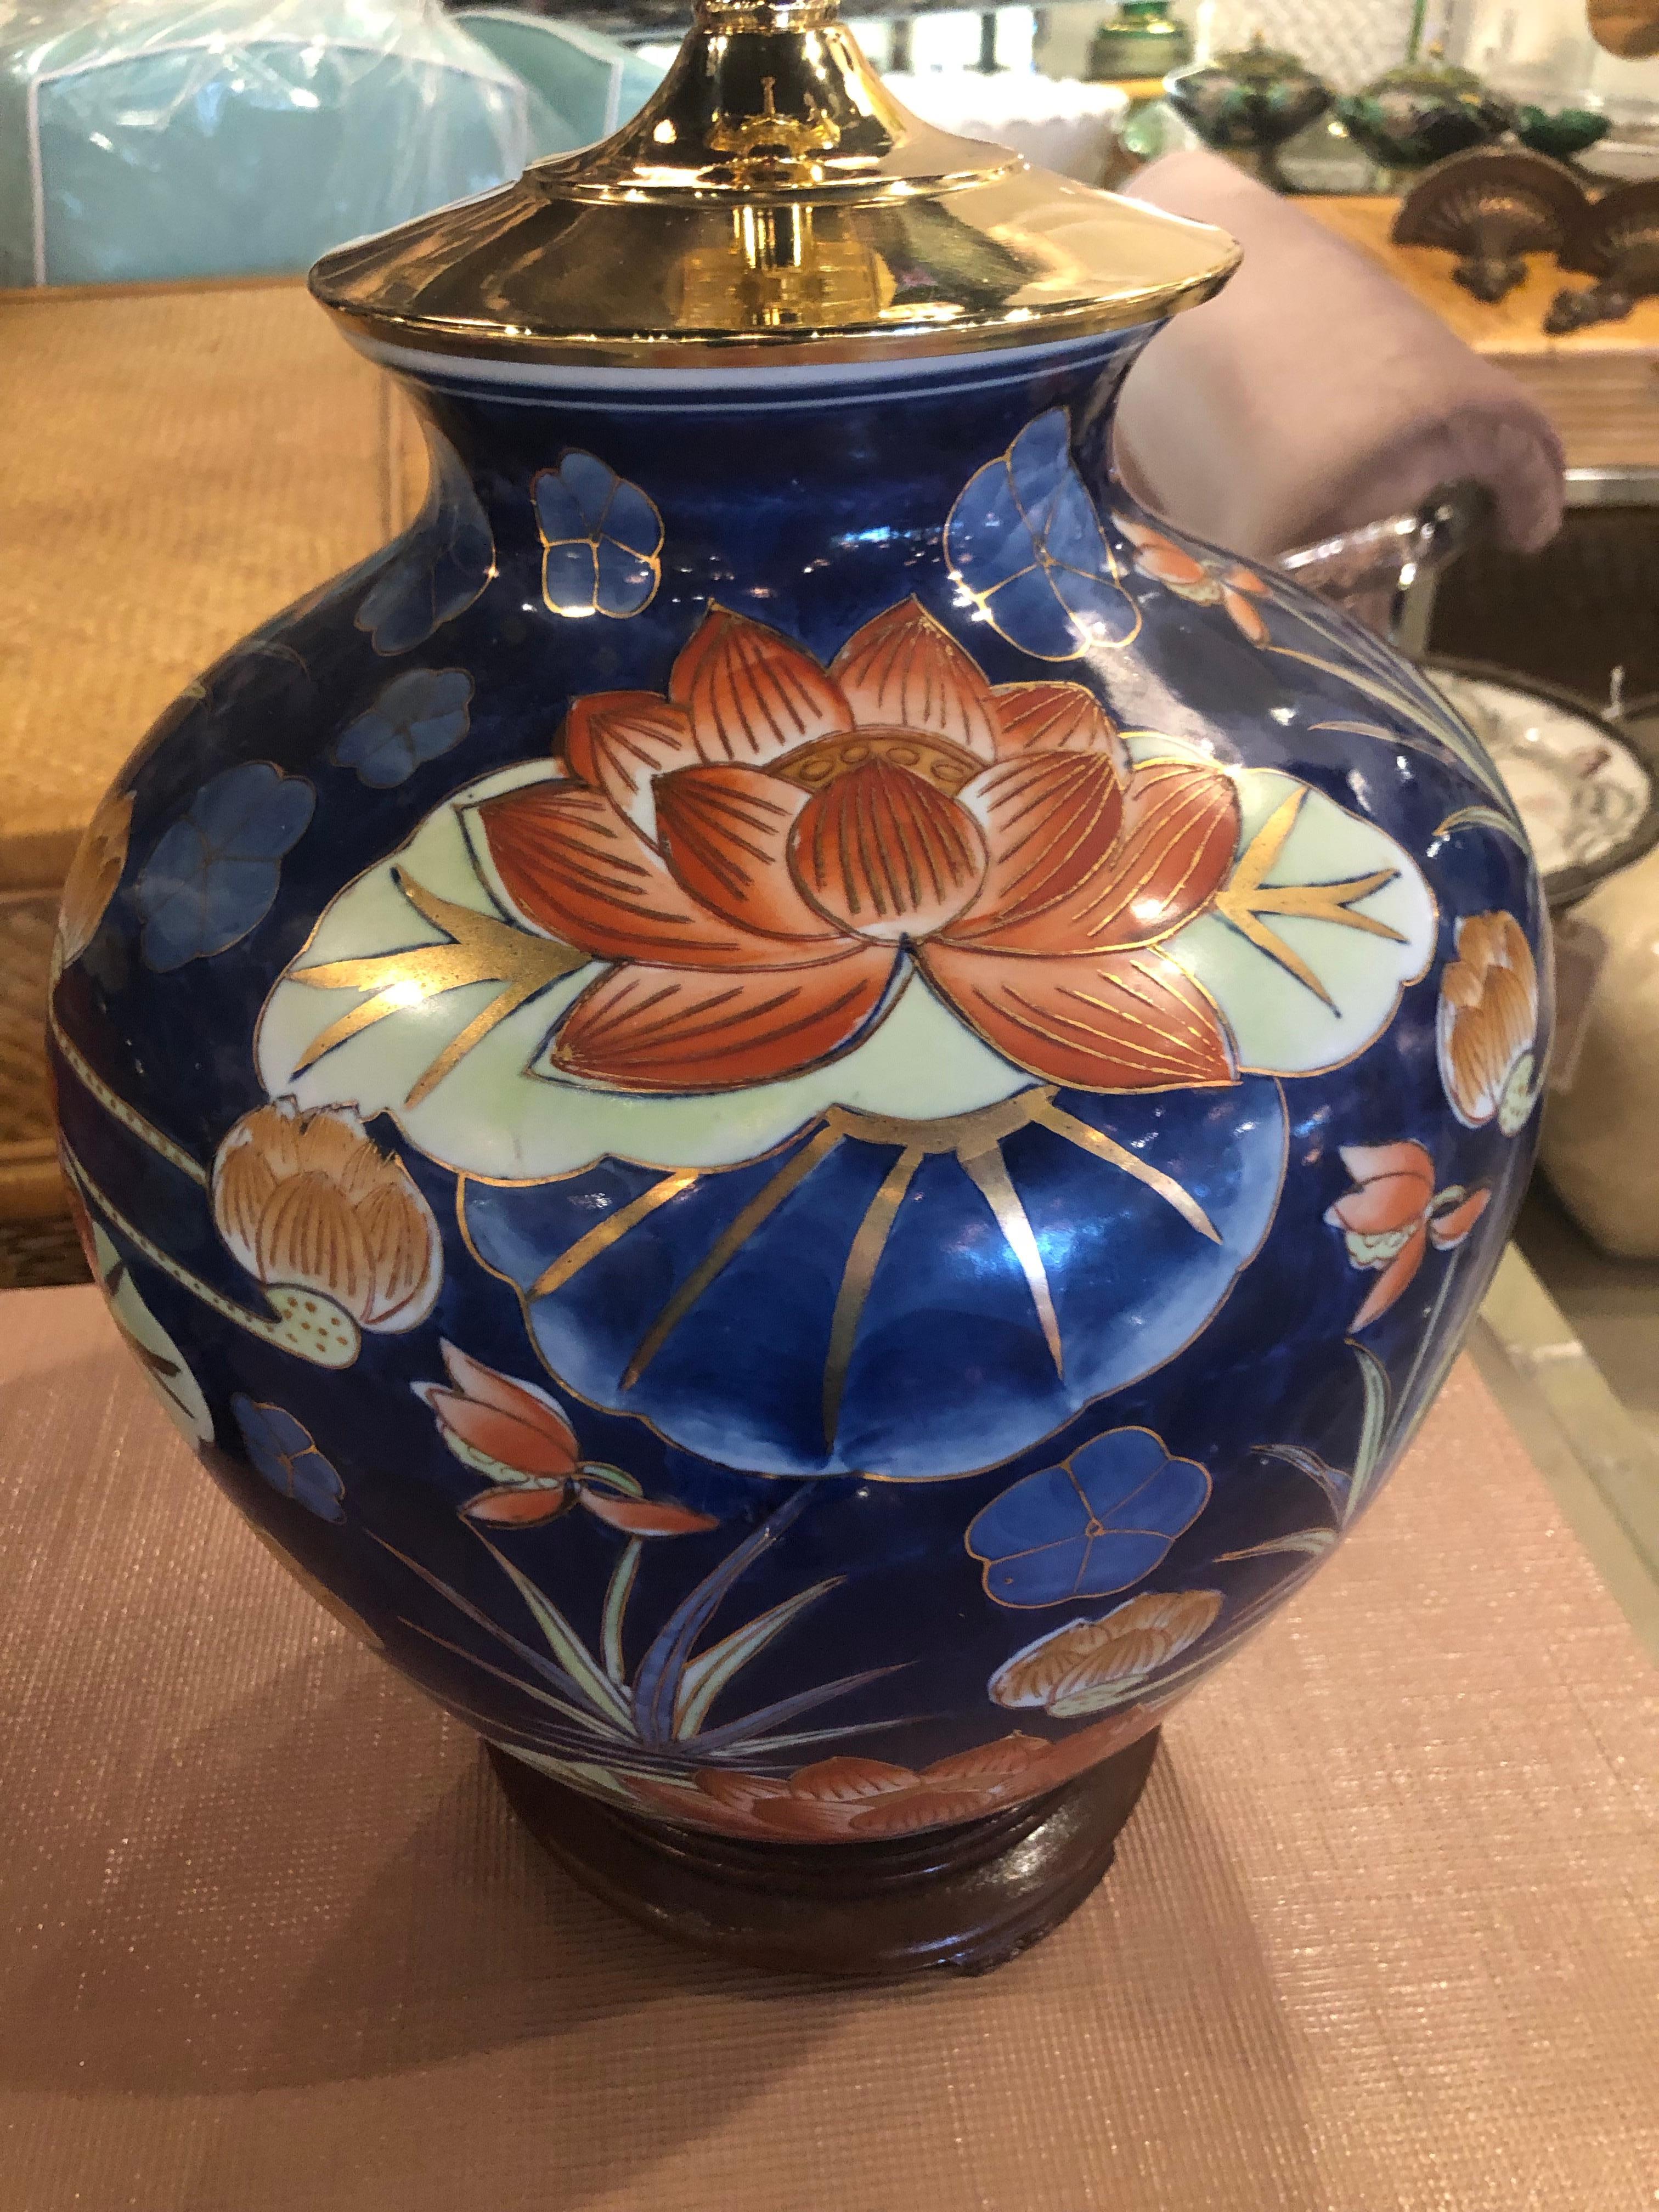 Vintage chinoiserie pair of navy blue & orange lotus flower ceramic table lamps. Brass pagoda tops, wood base. All new wiring and brass sockets. No chips or breaks.
Lamps are 25.5 H to top of finials
18.5 H to socket.